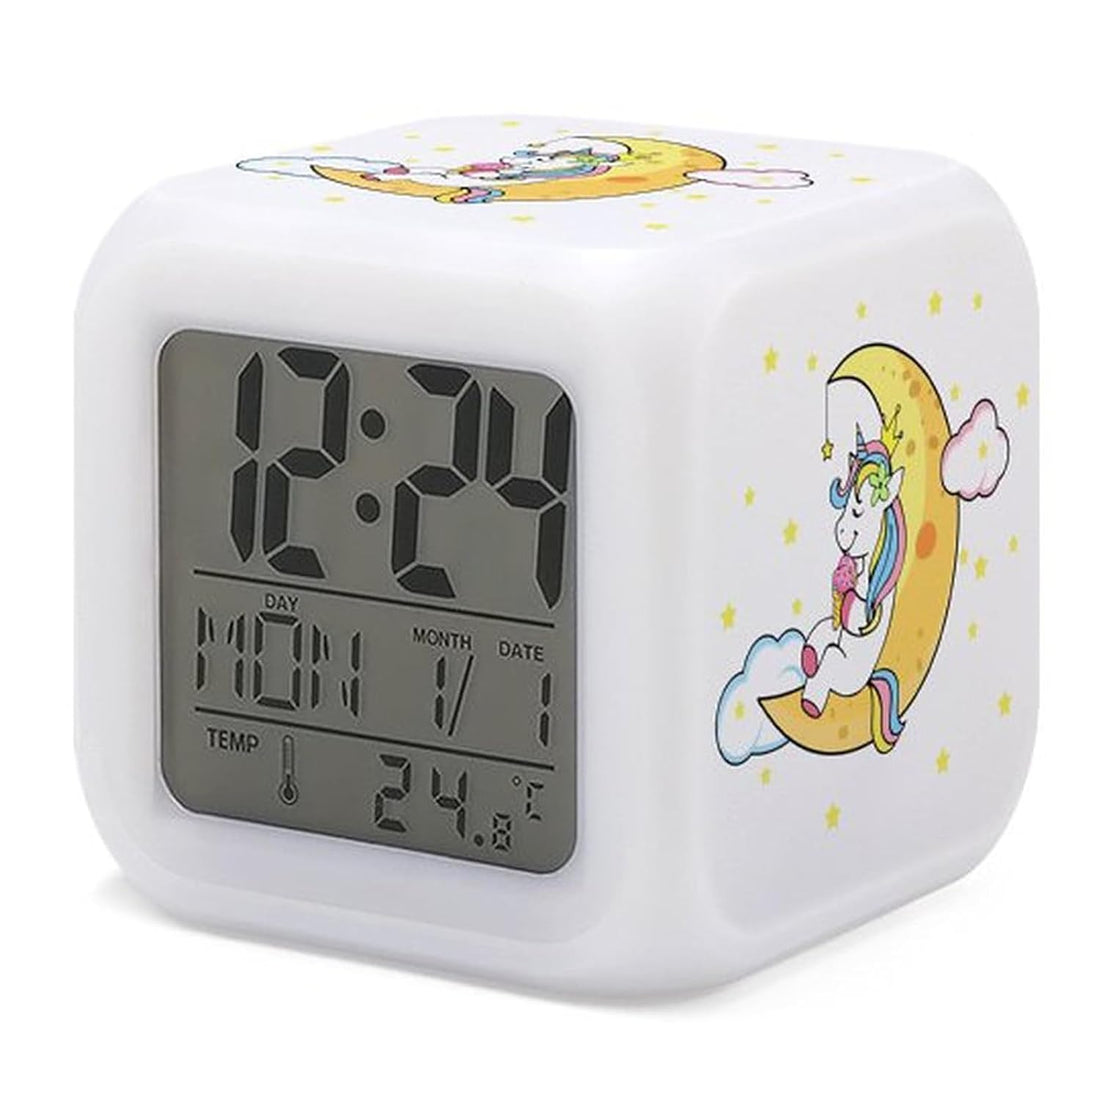 XUWU Cute Unicorn Star Alarm Clock for Kids 7 LED Color Changing Wake Up Clock Home Decor Alarm Clock for Boy Girl Bedroom Digital Alarm Clock with Temperature Display